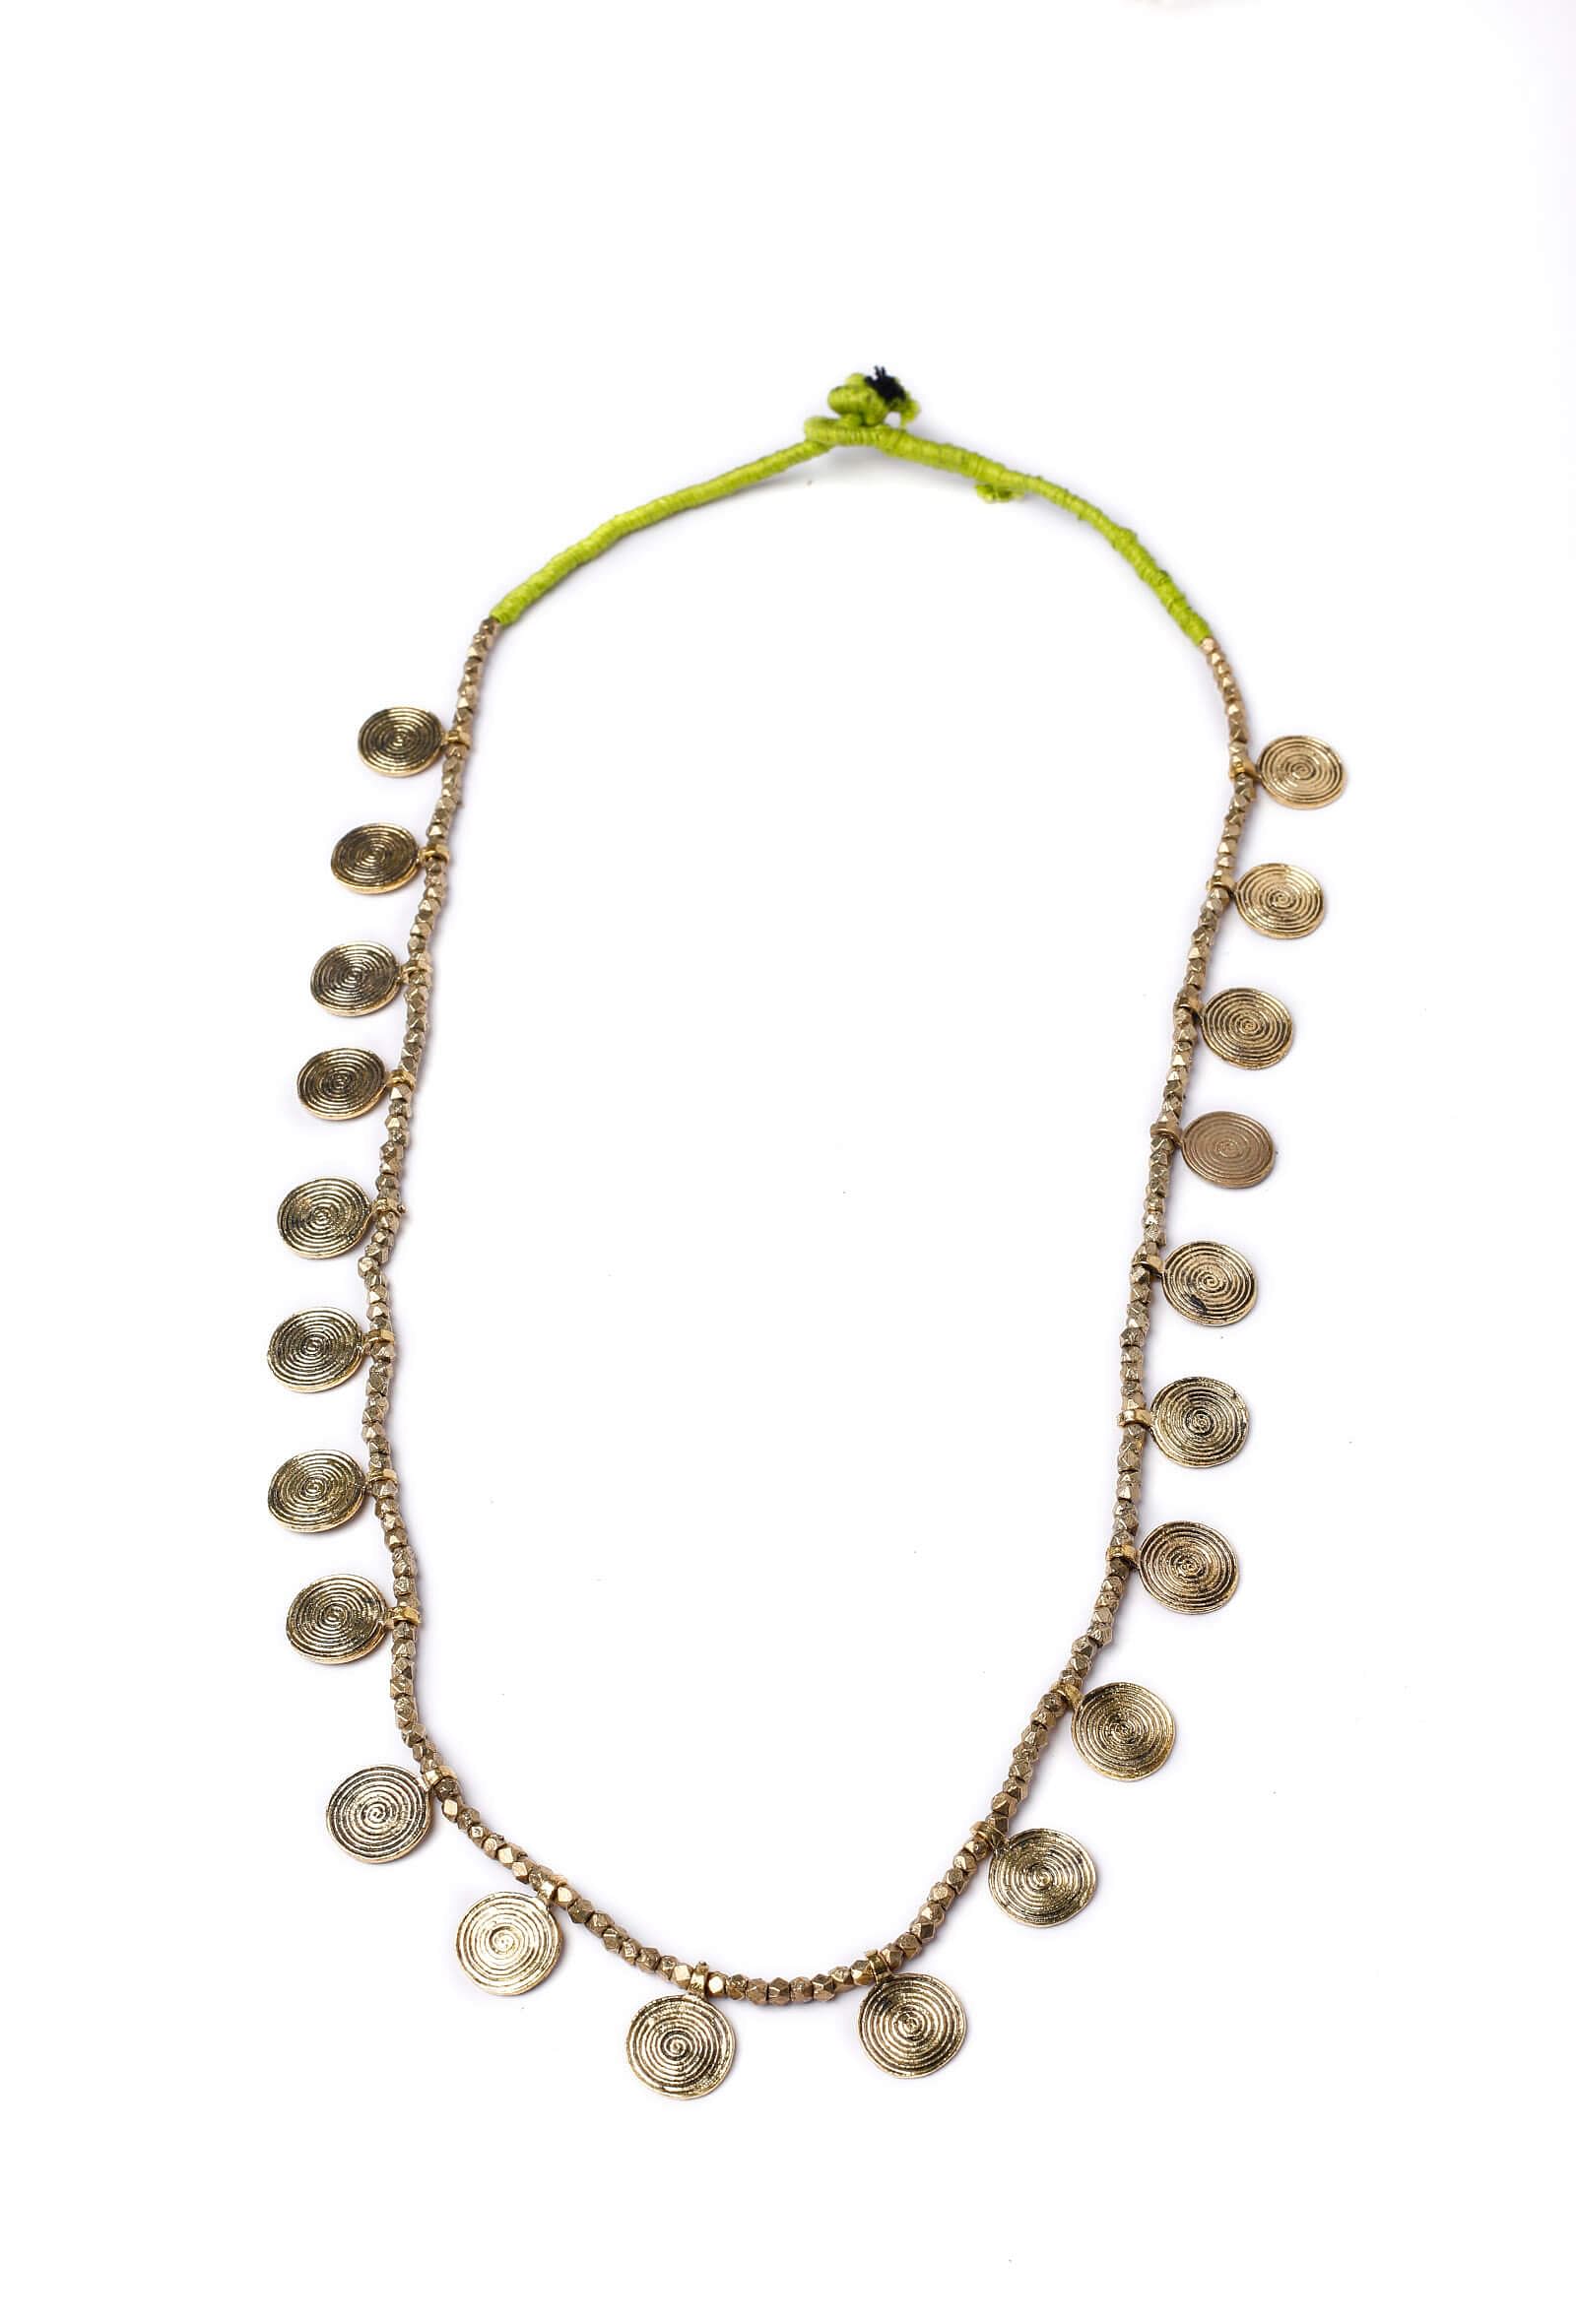 Dhokra-Inspired Green Cord Necklace